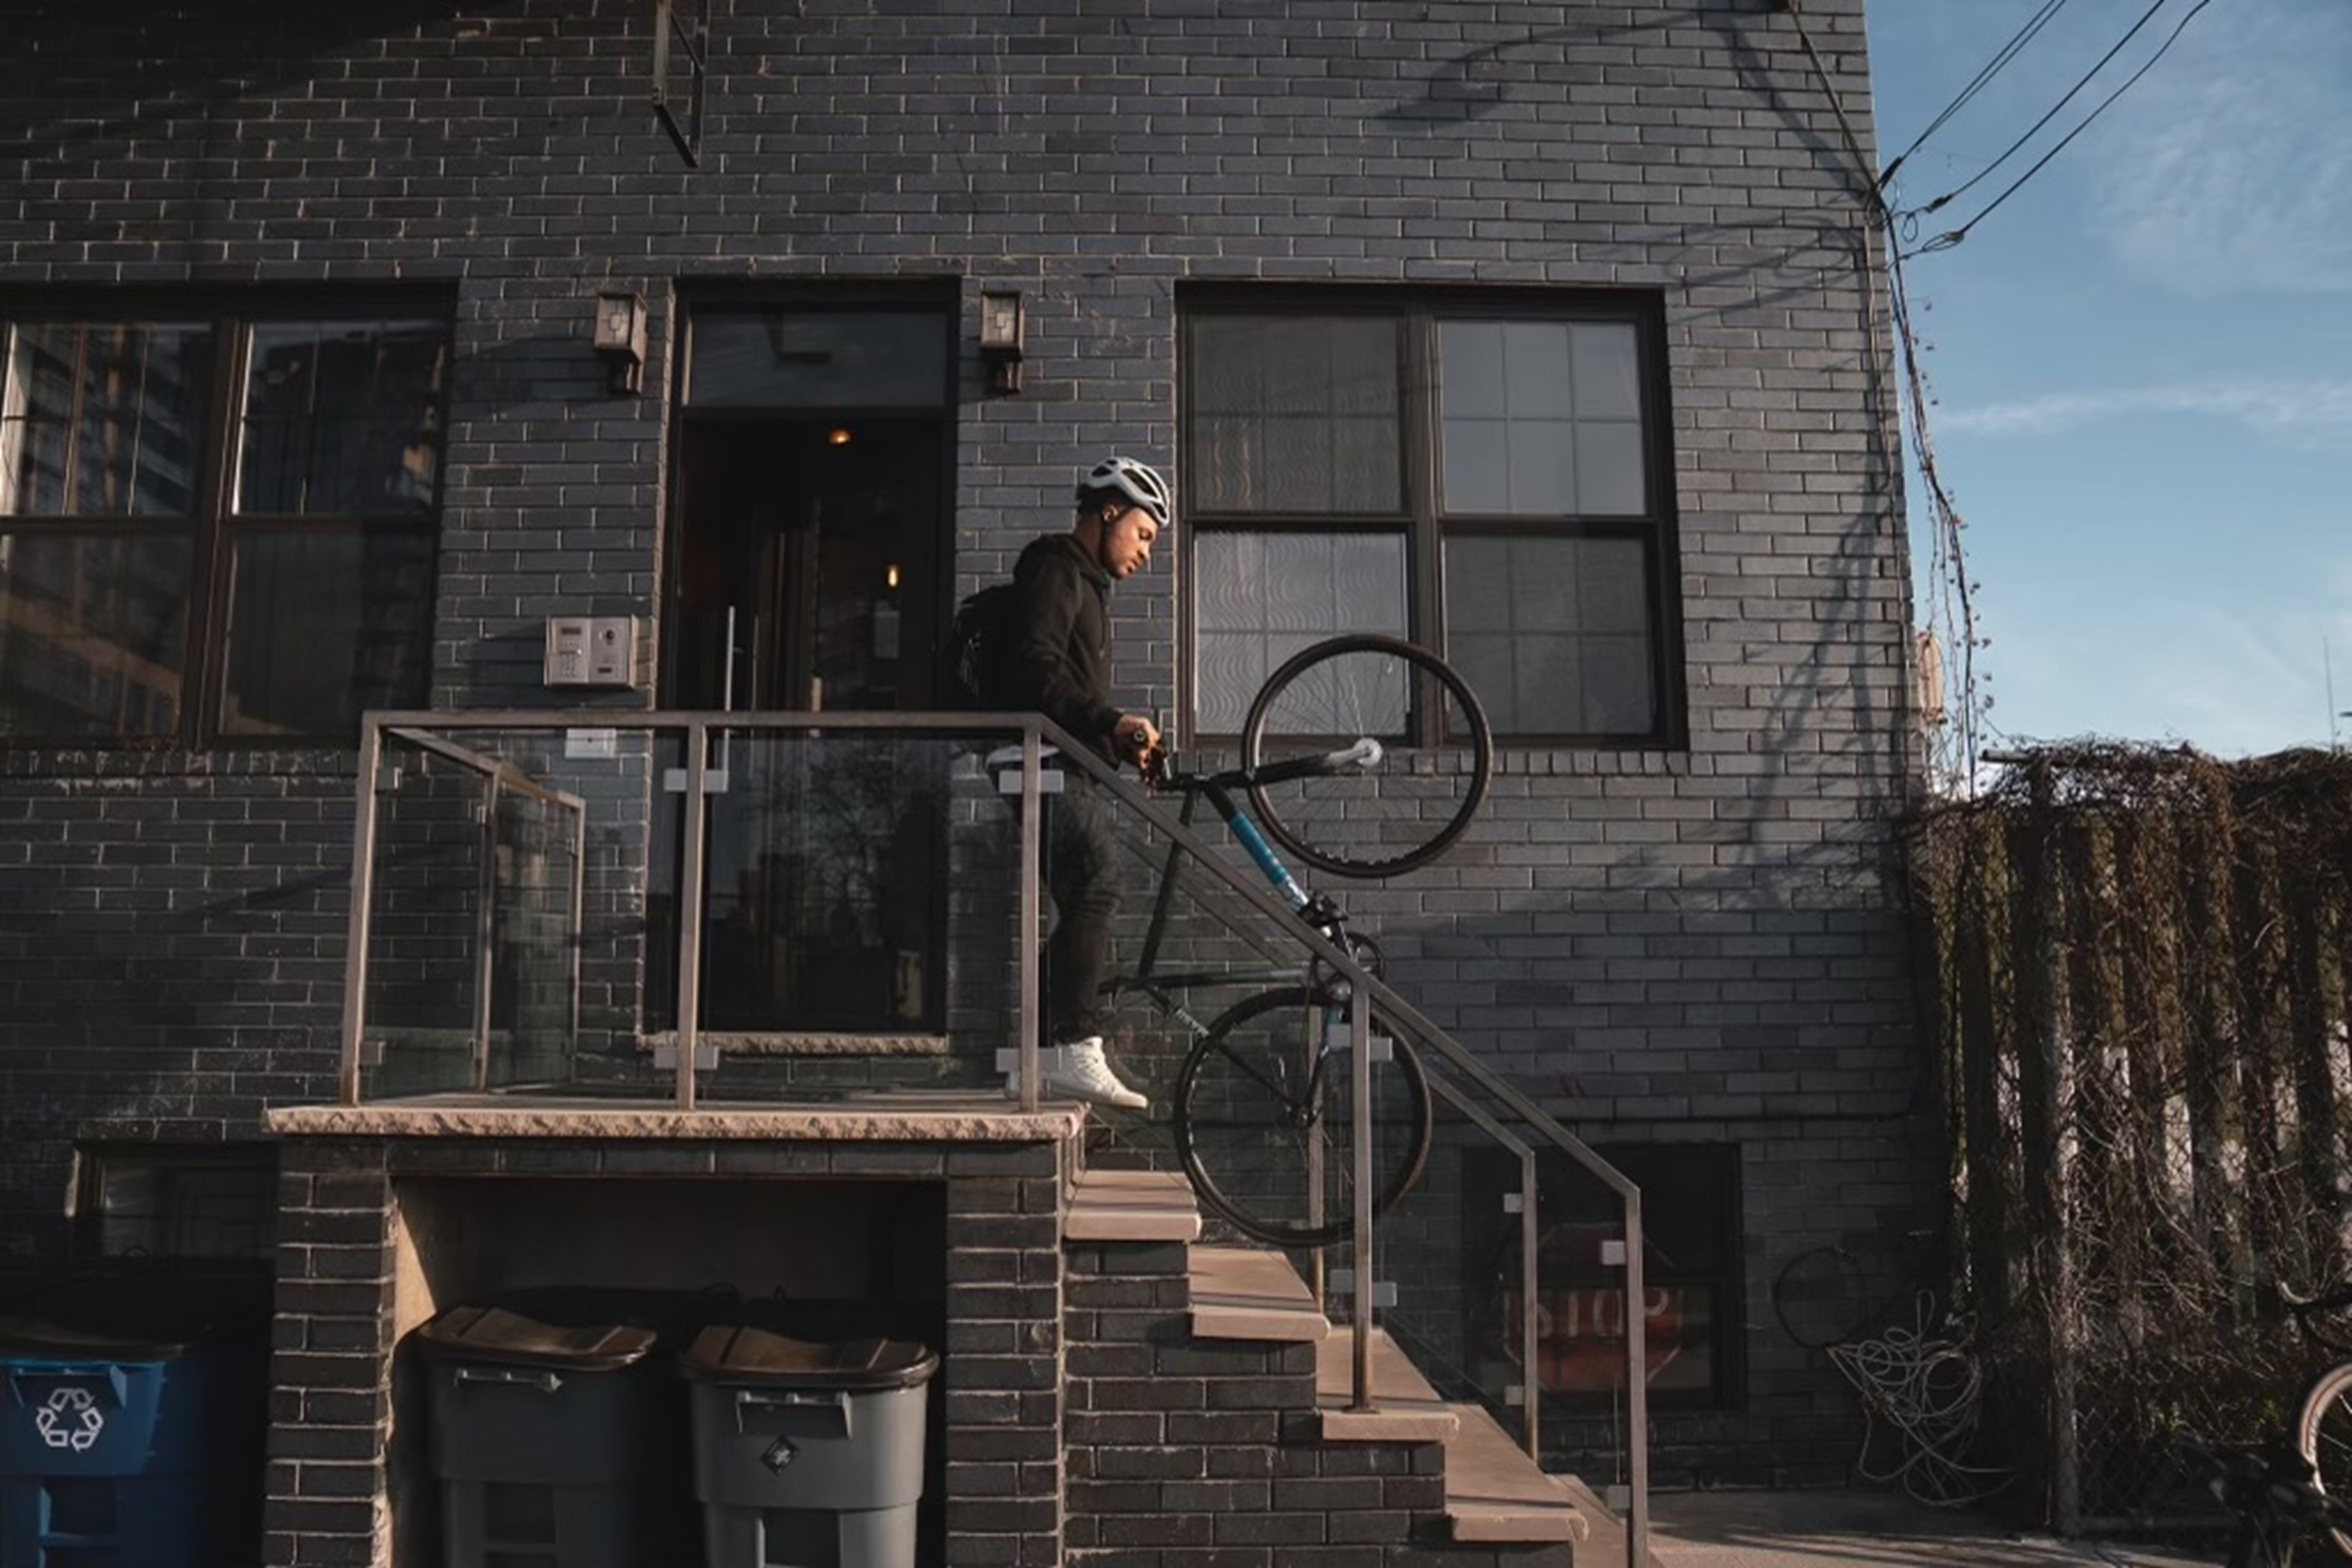 Julien Howard a.k.a. Velo Barber carrying a bicycle down a set of stairs on a porch landing